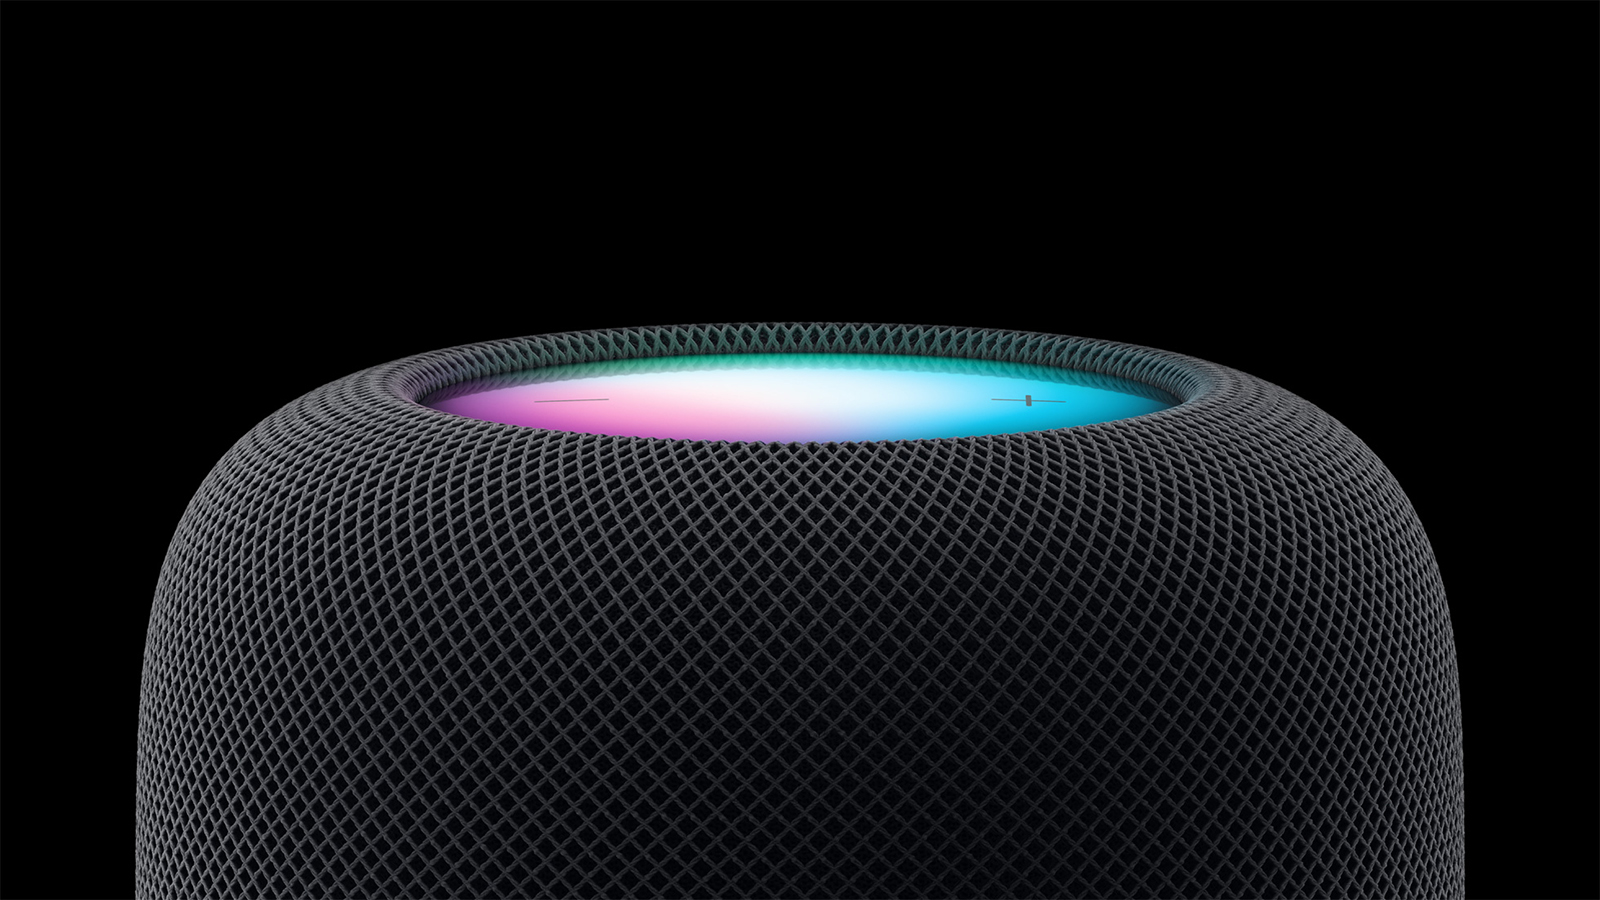 Close-up shot of the top of the 2 generation HomePod